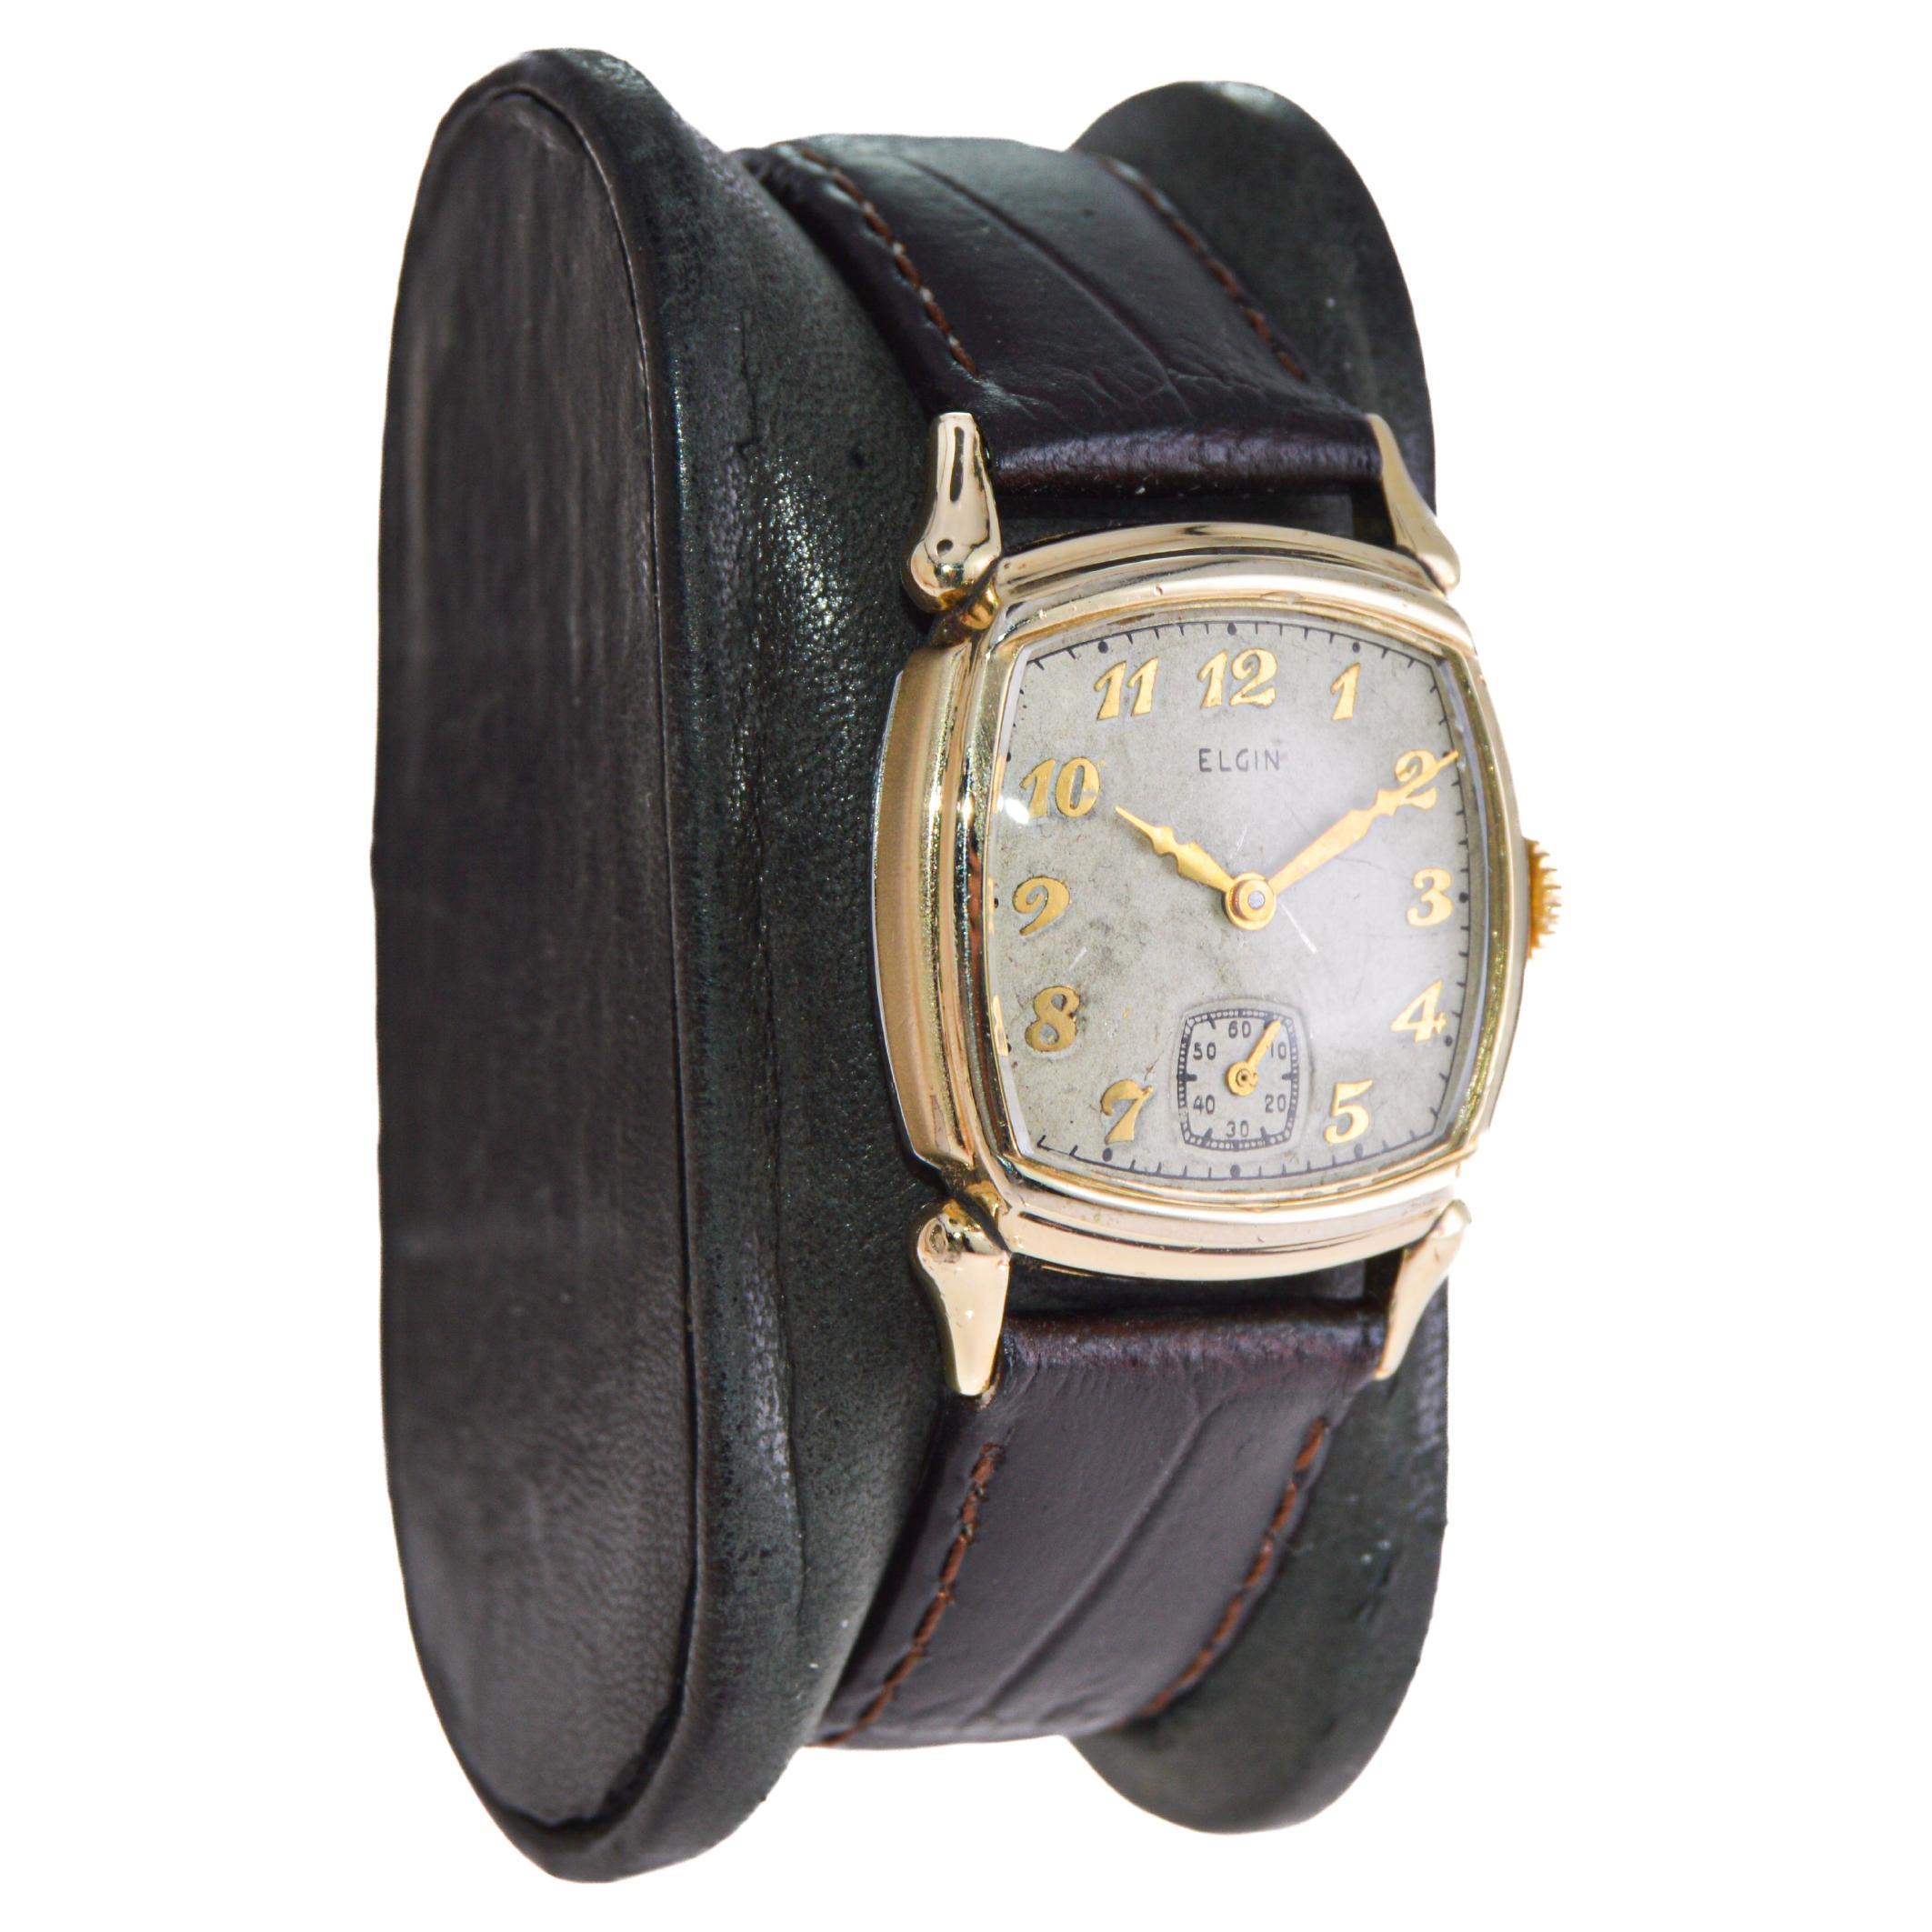 FACTORY / HOUSE: Elgin Watch Company
STYLE / REFERENCE: Cushion Shaped
METAL / MATERIAL: Gold Filled
CIRCA / YEAR: 1940's
DIMENSIONS / SIZE: Length 35mm X Width 25mm
MOVEMENT / CALIBER: Manual Winding / 15 Jewels / Caliber 
DIAL / HANDS: Original